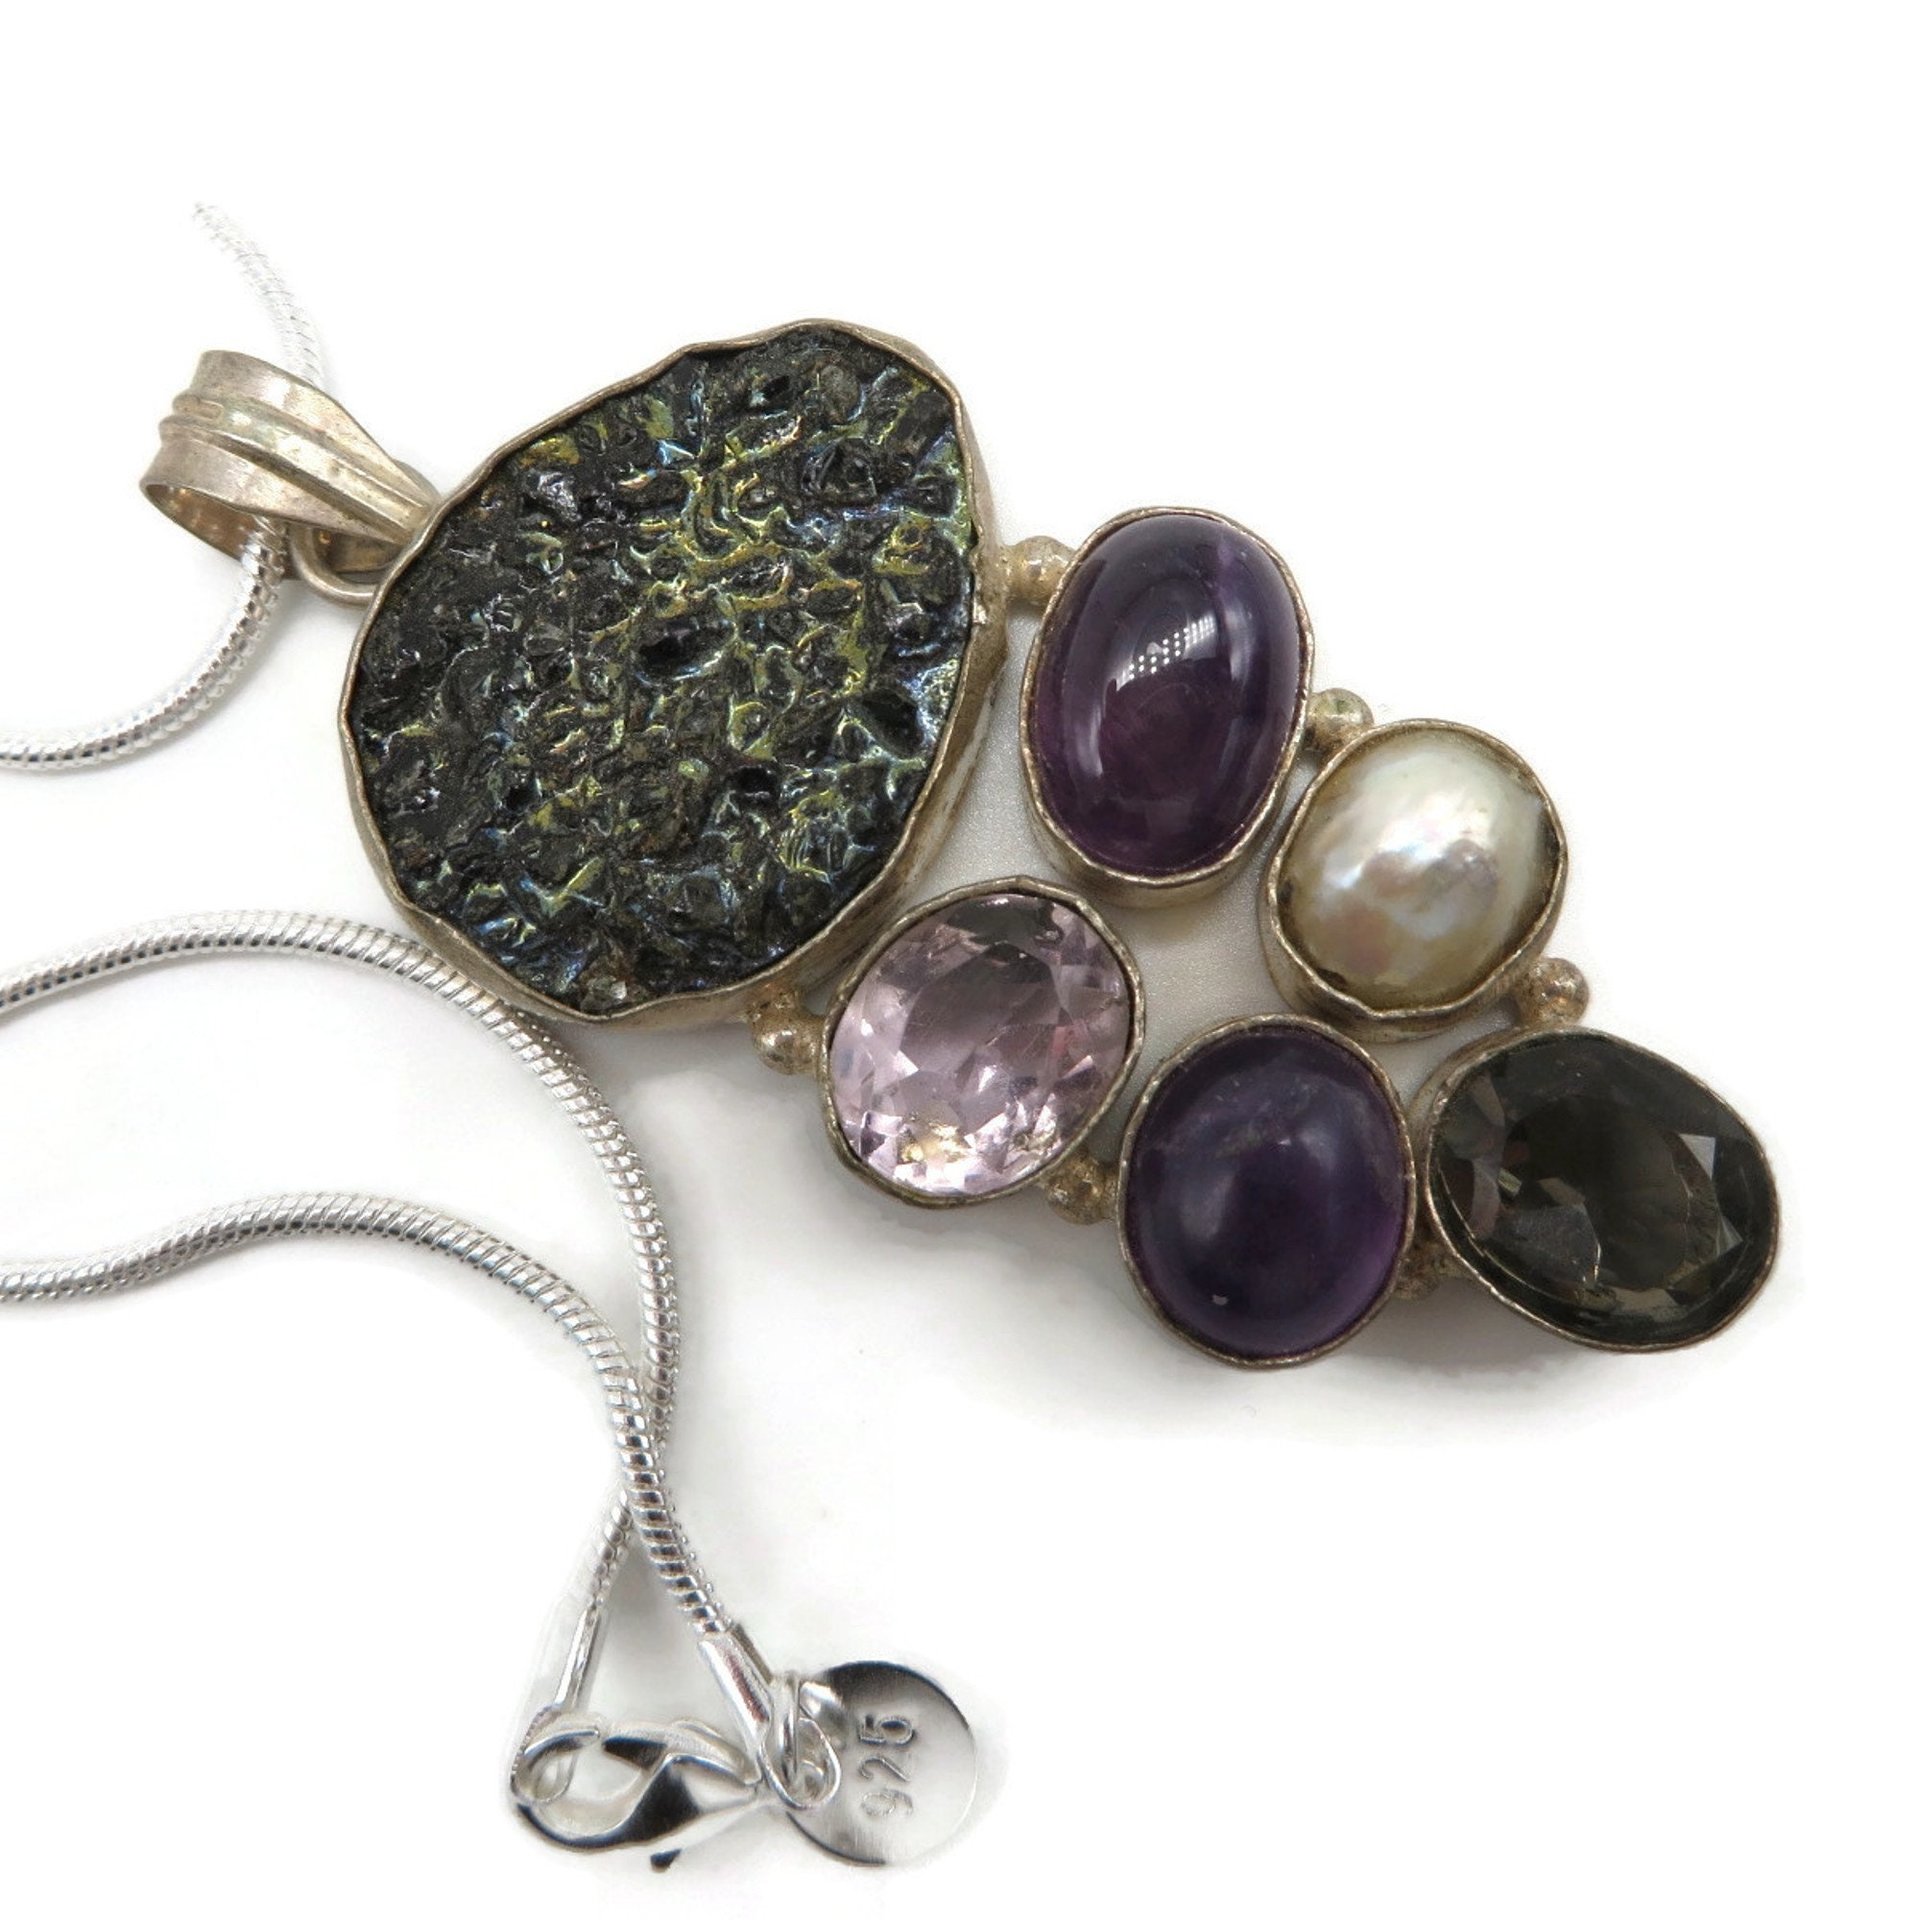 Sterling Silver Gemstone Pendant Necklace, Amethyst, Pearl, and Quartz Pendant, Snake Chain Necklace